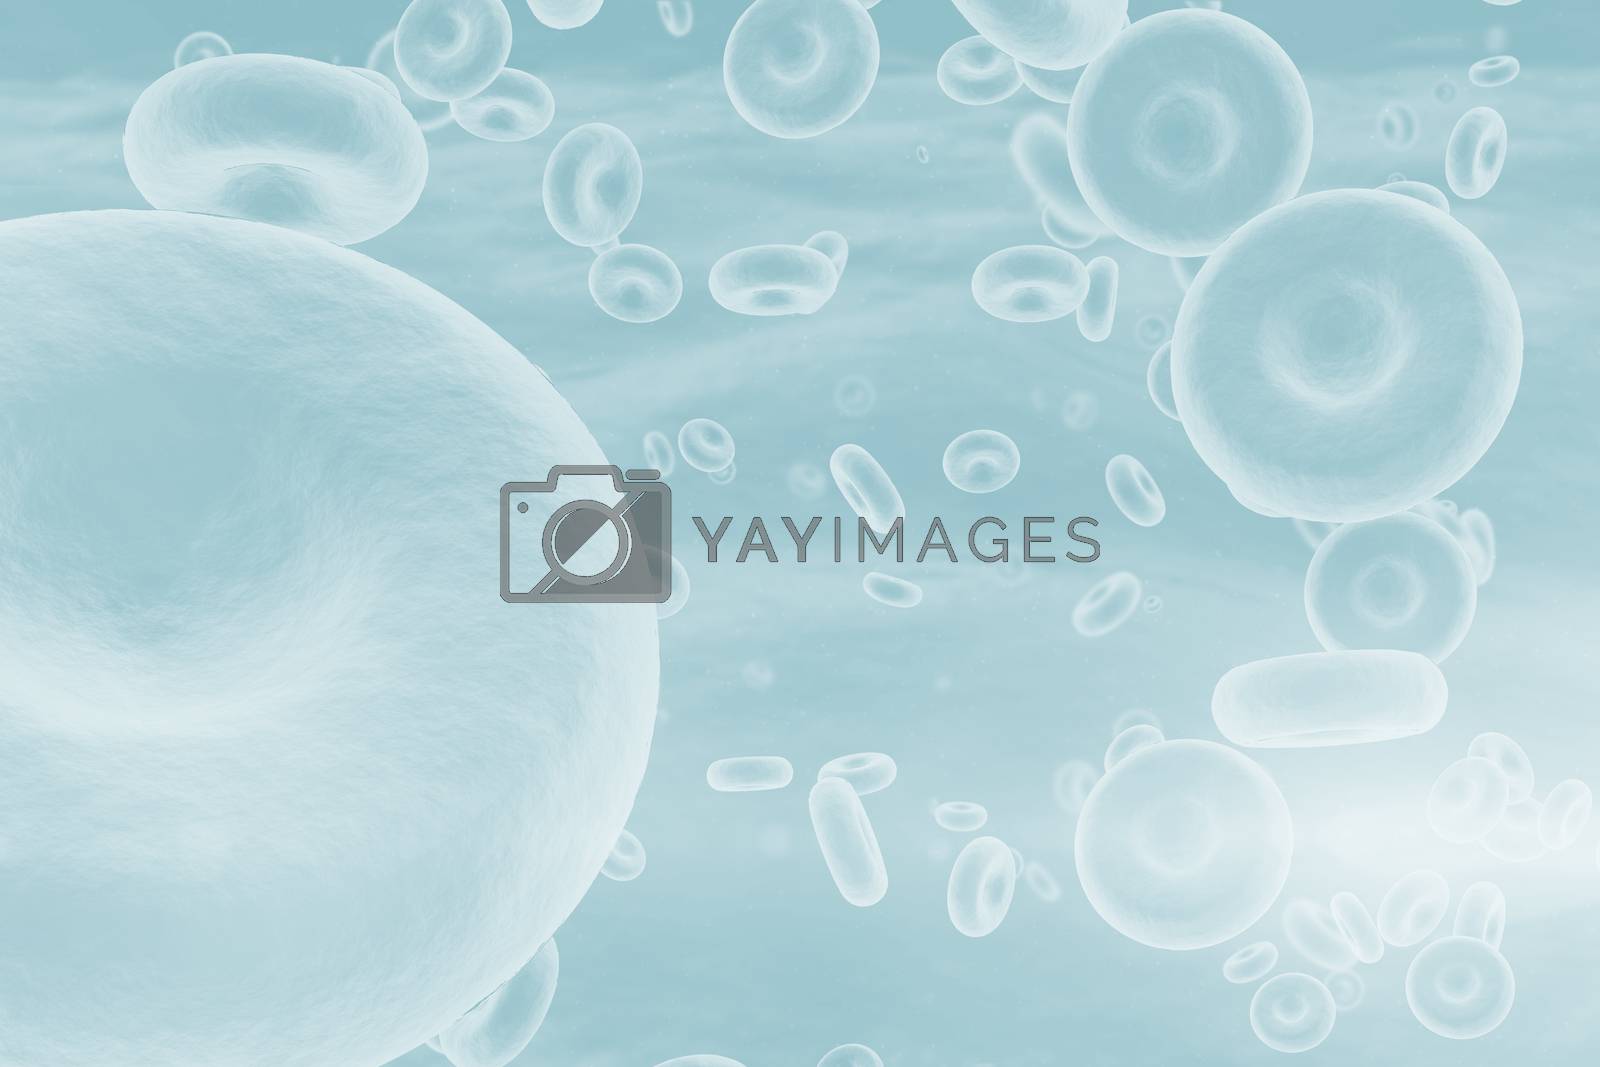 Royalty free image of Red blood cells in human body by Wavebreakmedia